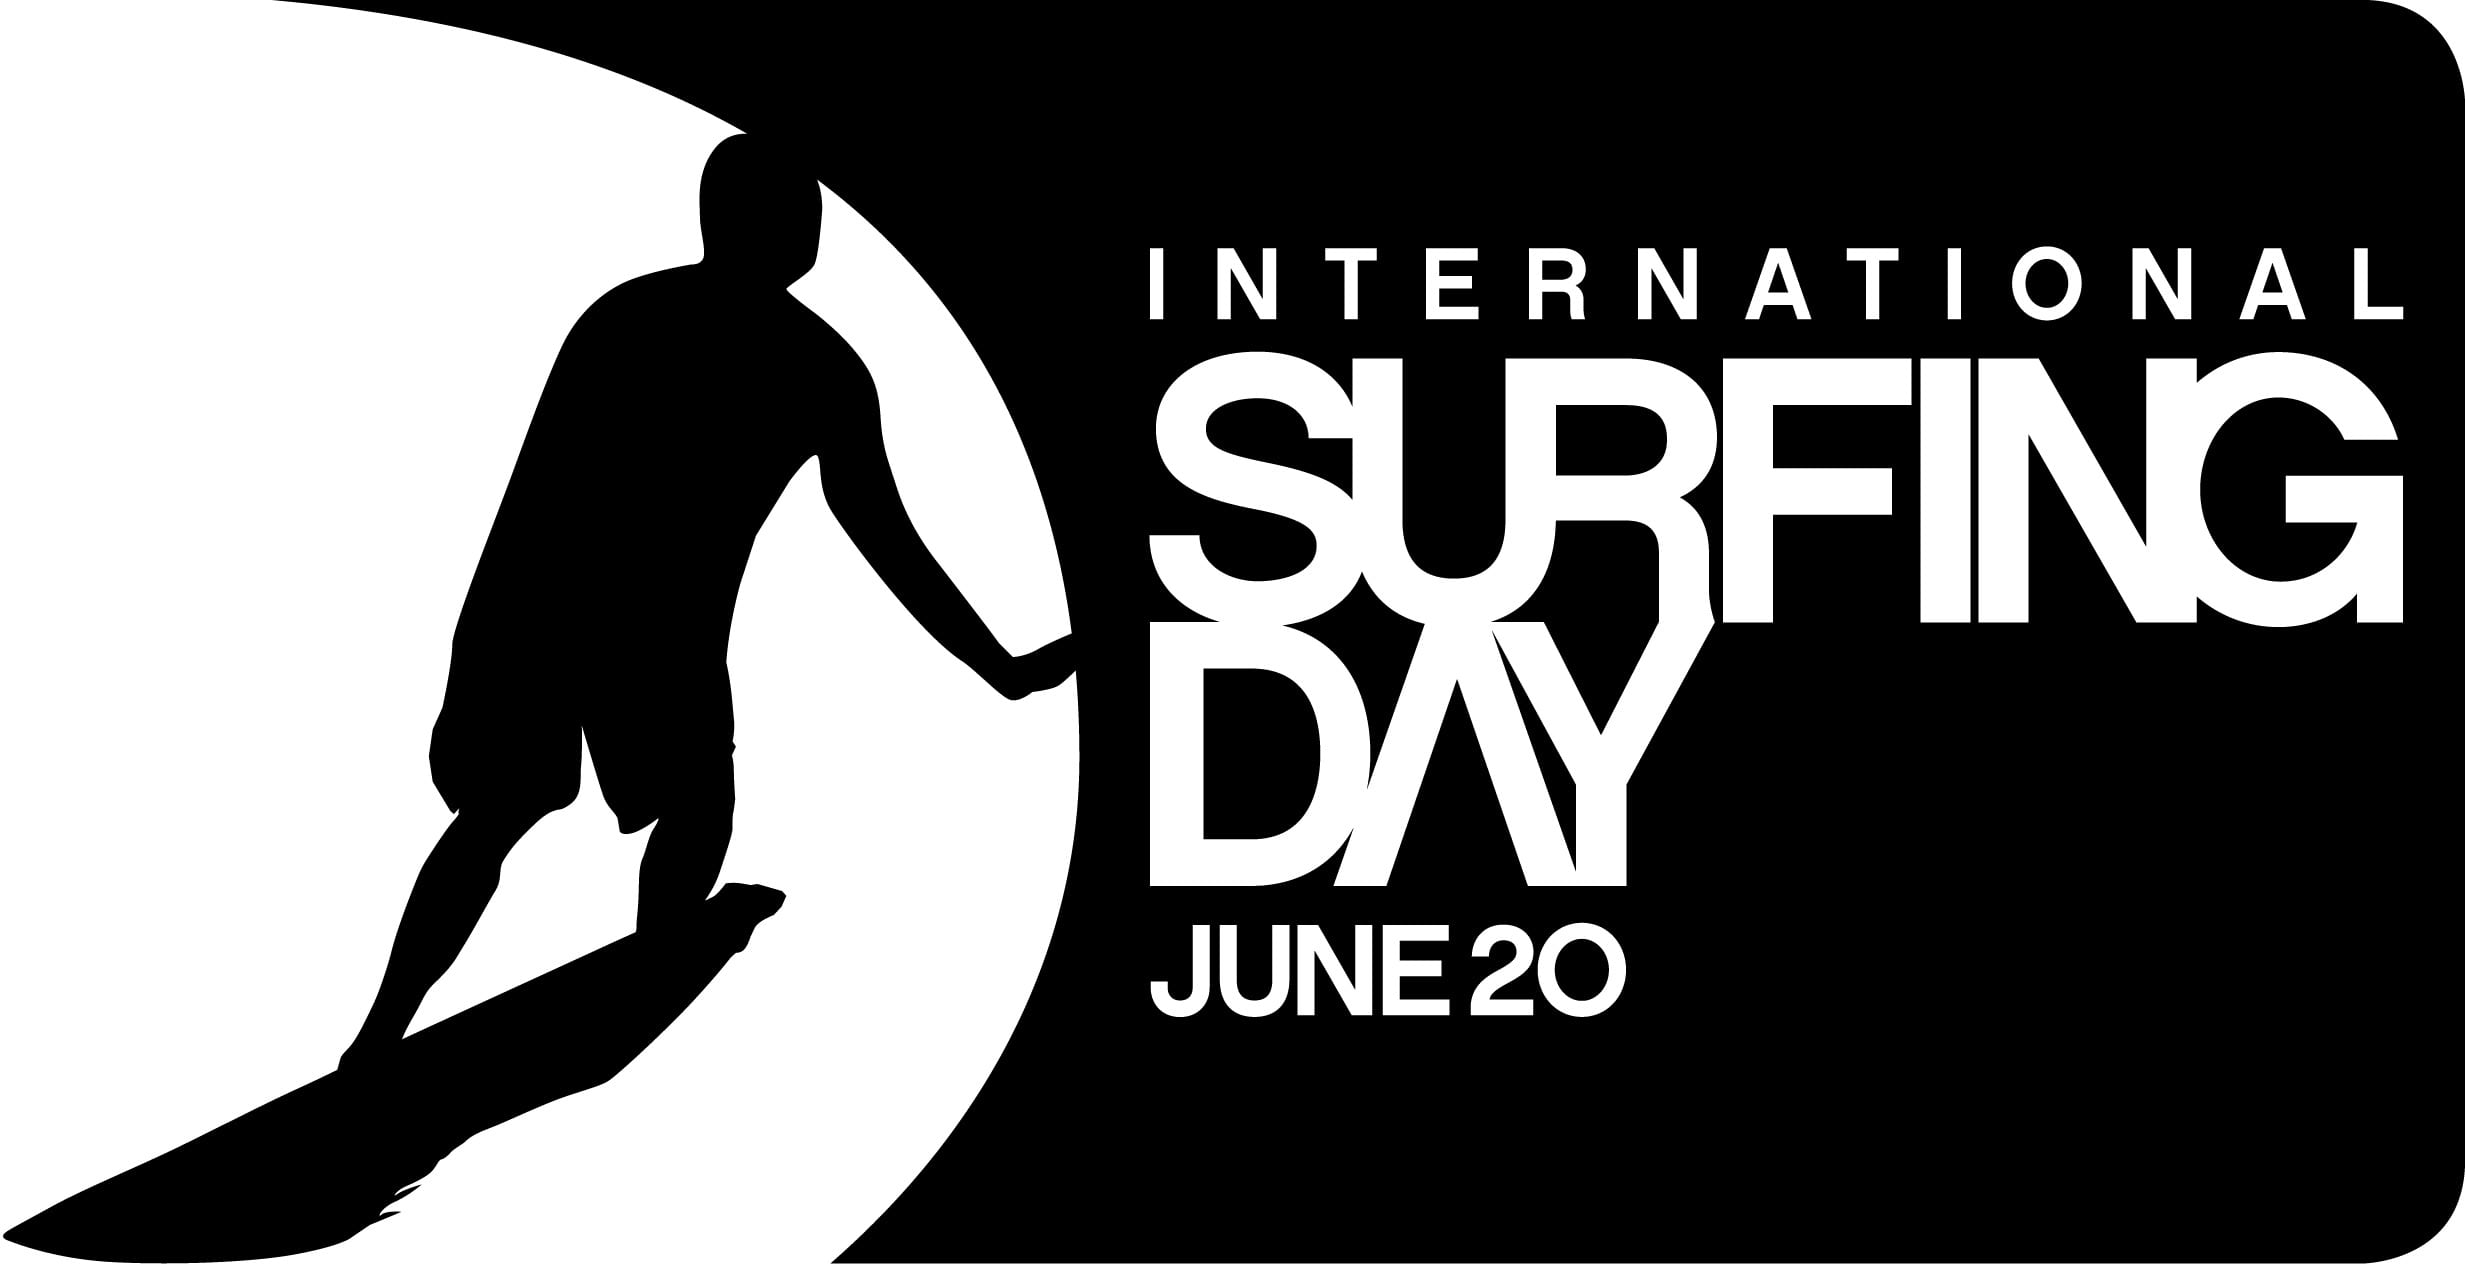 Save the Date International Surfing Day